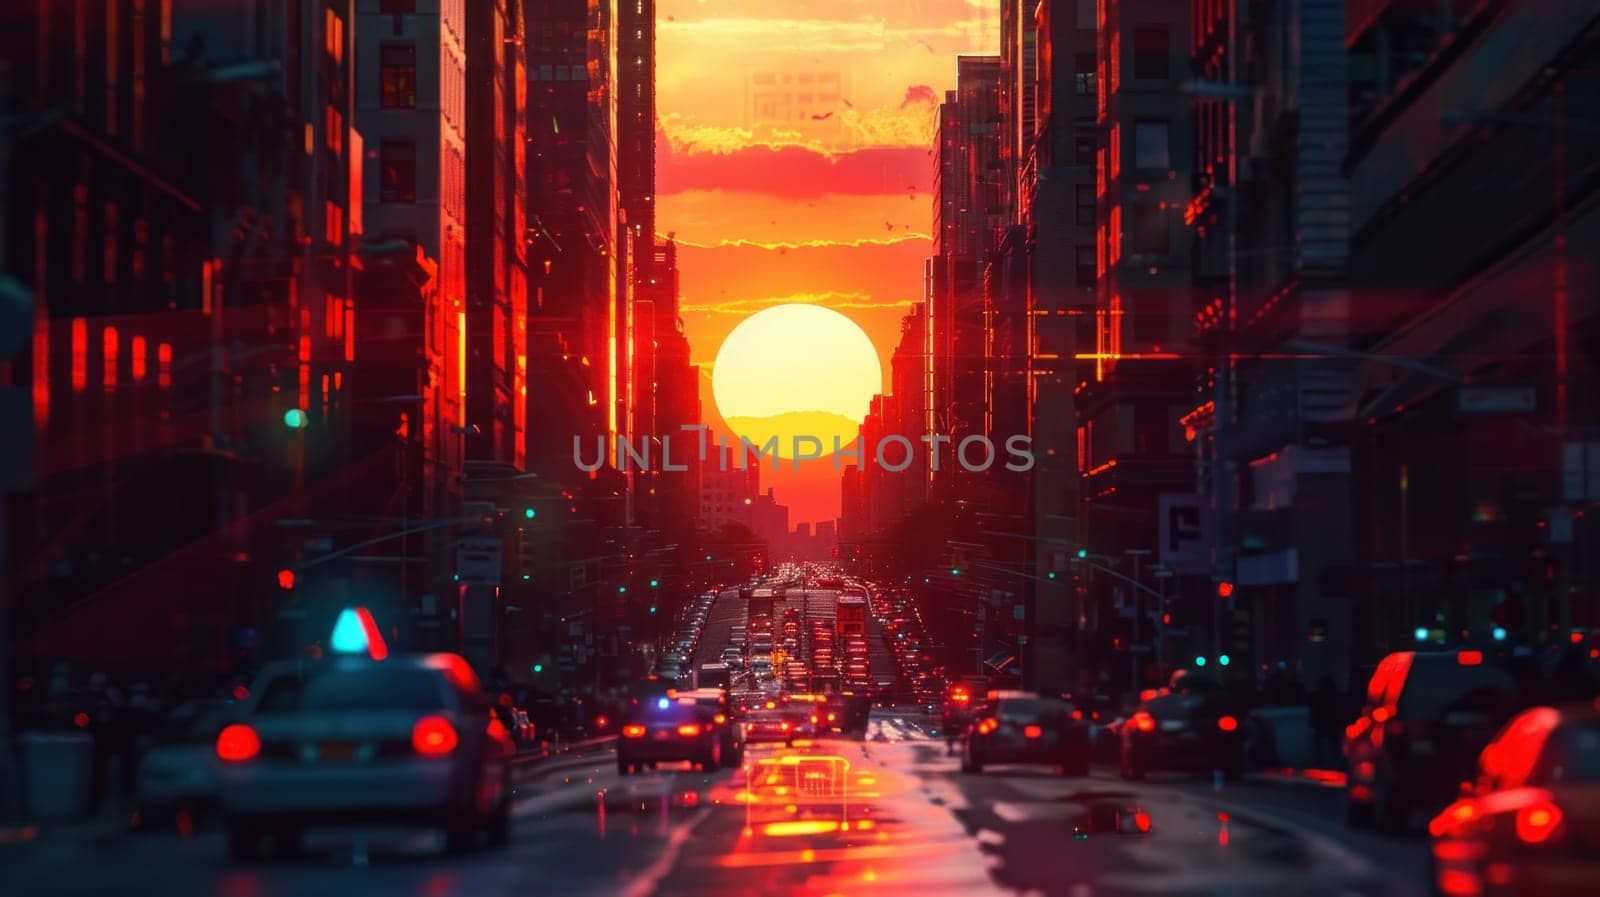 A city street with cars and a large sun in the sky by golfmerrymaker